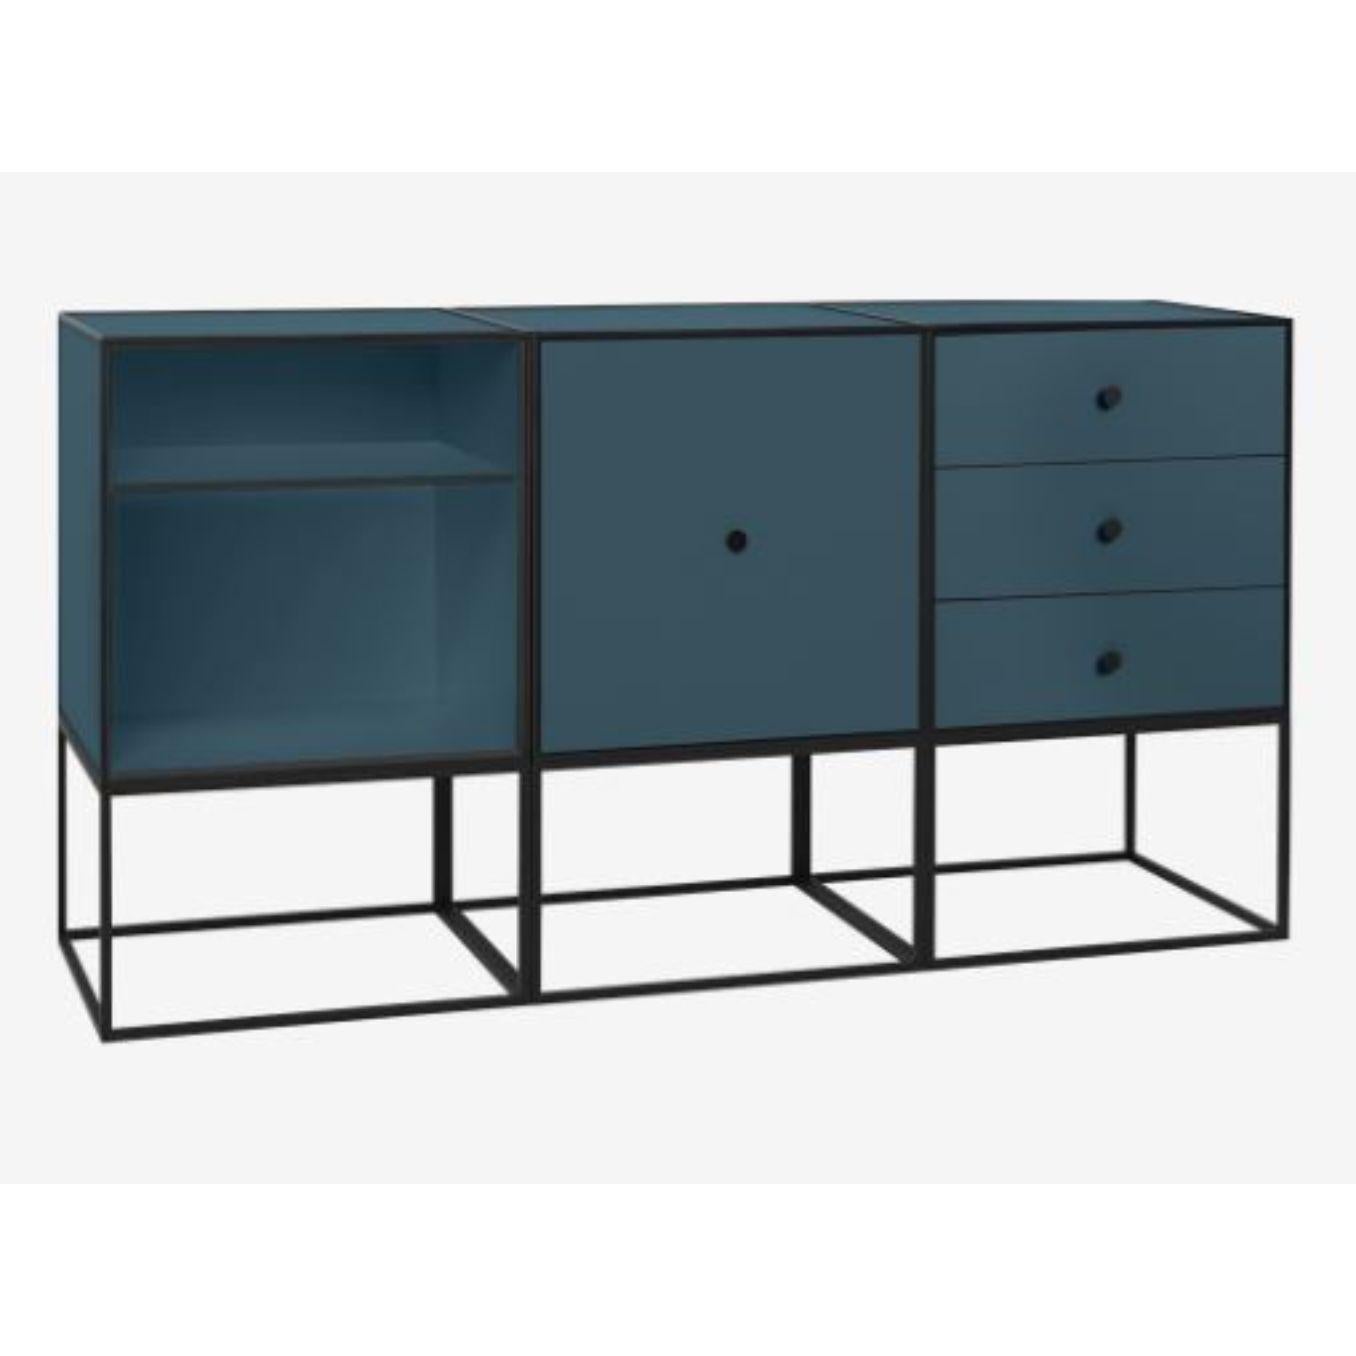 49 Fjord frame sideboard trio by Lassen
Dimensions: D 147 x W 42 x H 77 cm 
Materials: Finér, Melamin, Melamine, Metal, Veneer
Also available in different colors and dimensions. 
Weight: 88 Kg

By Lassen is a Danish design brand focused on